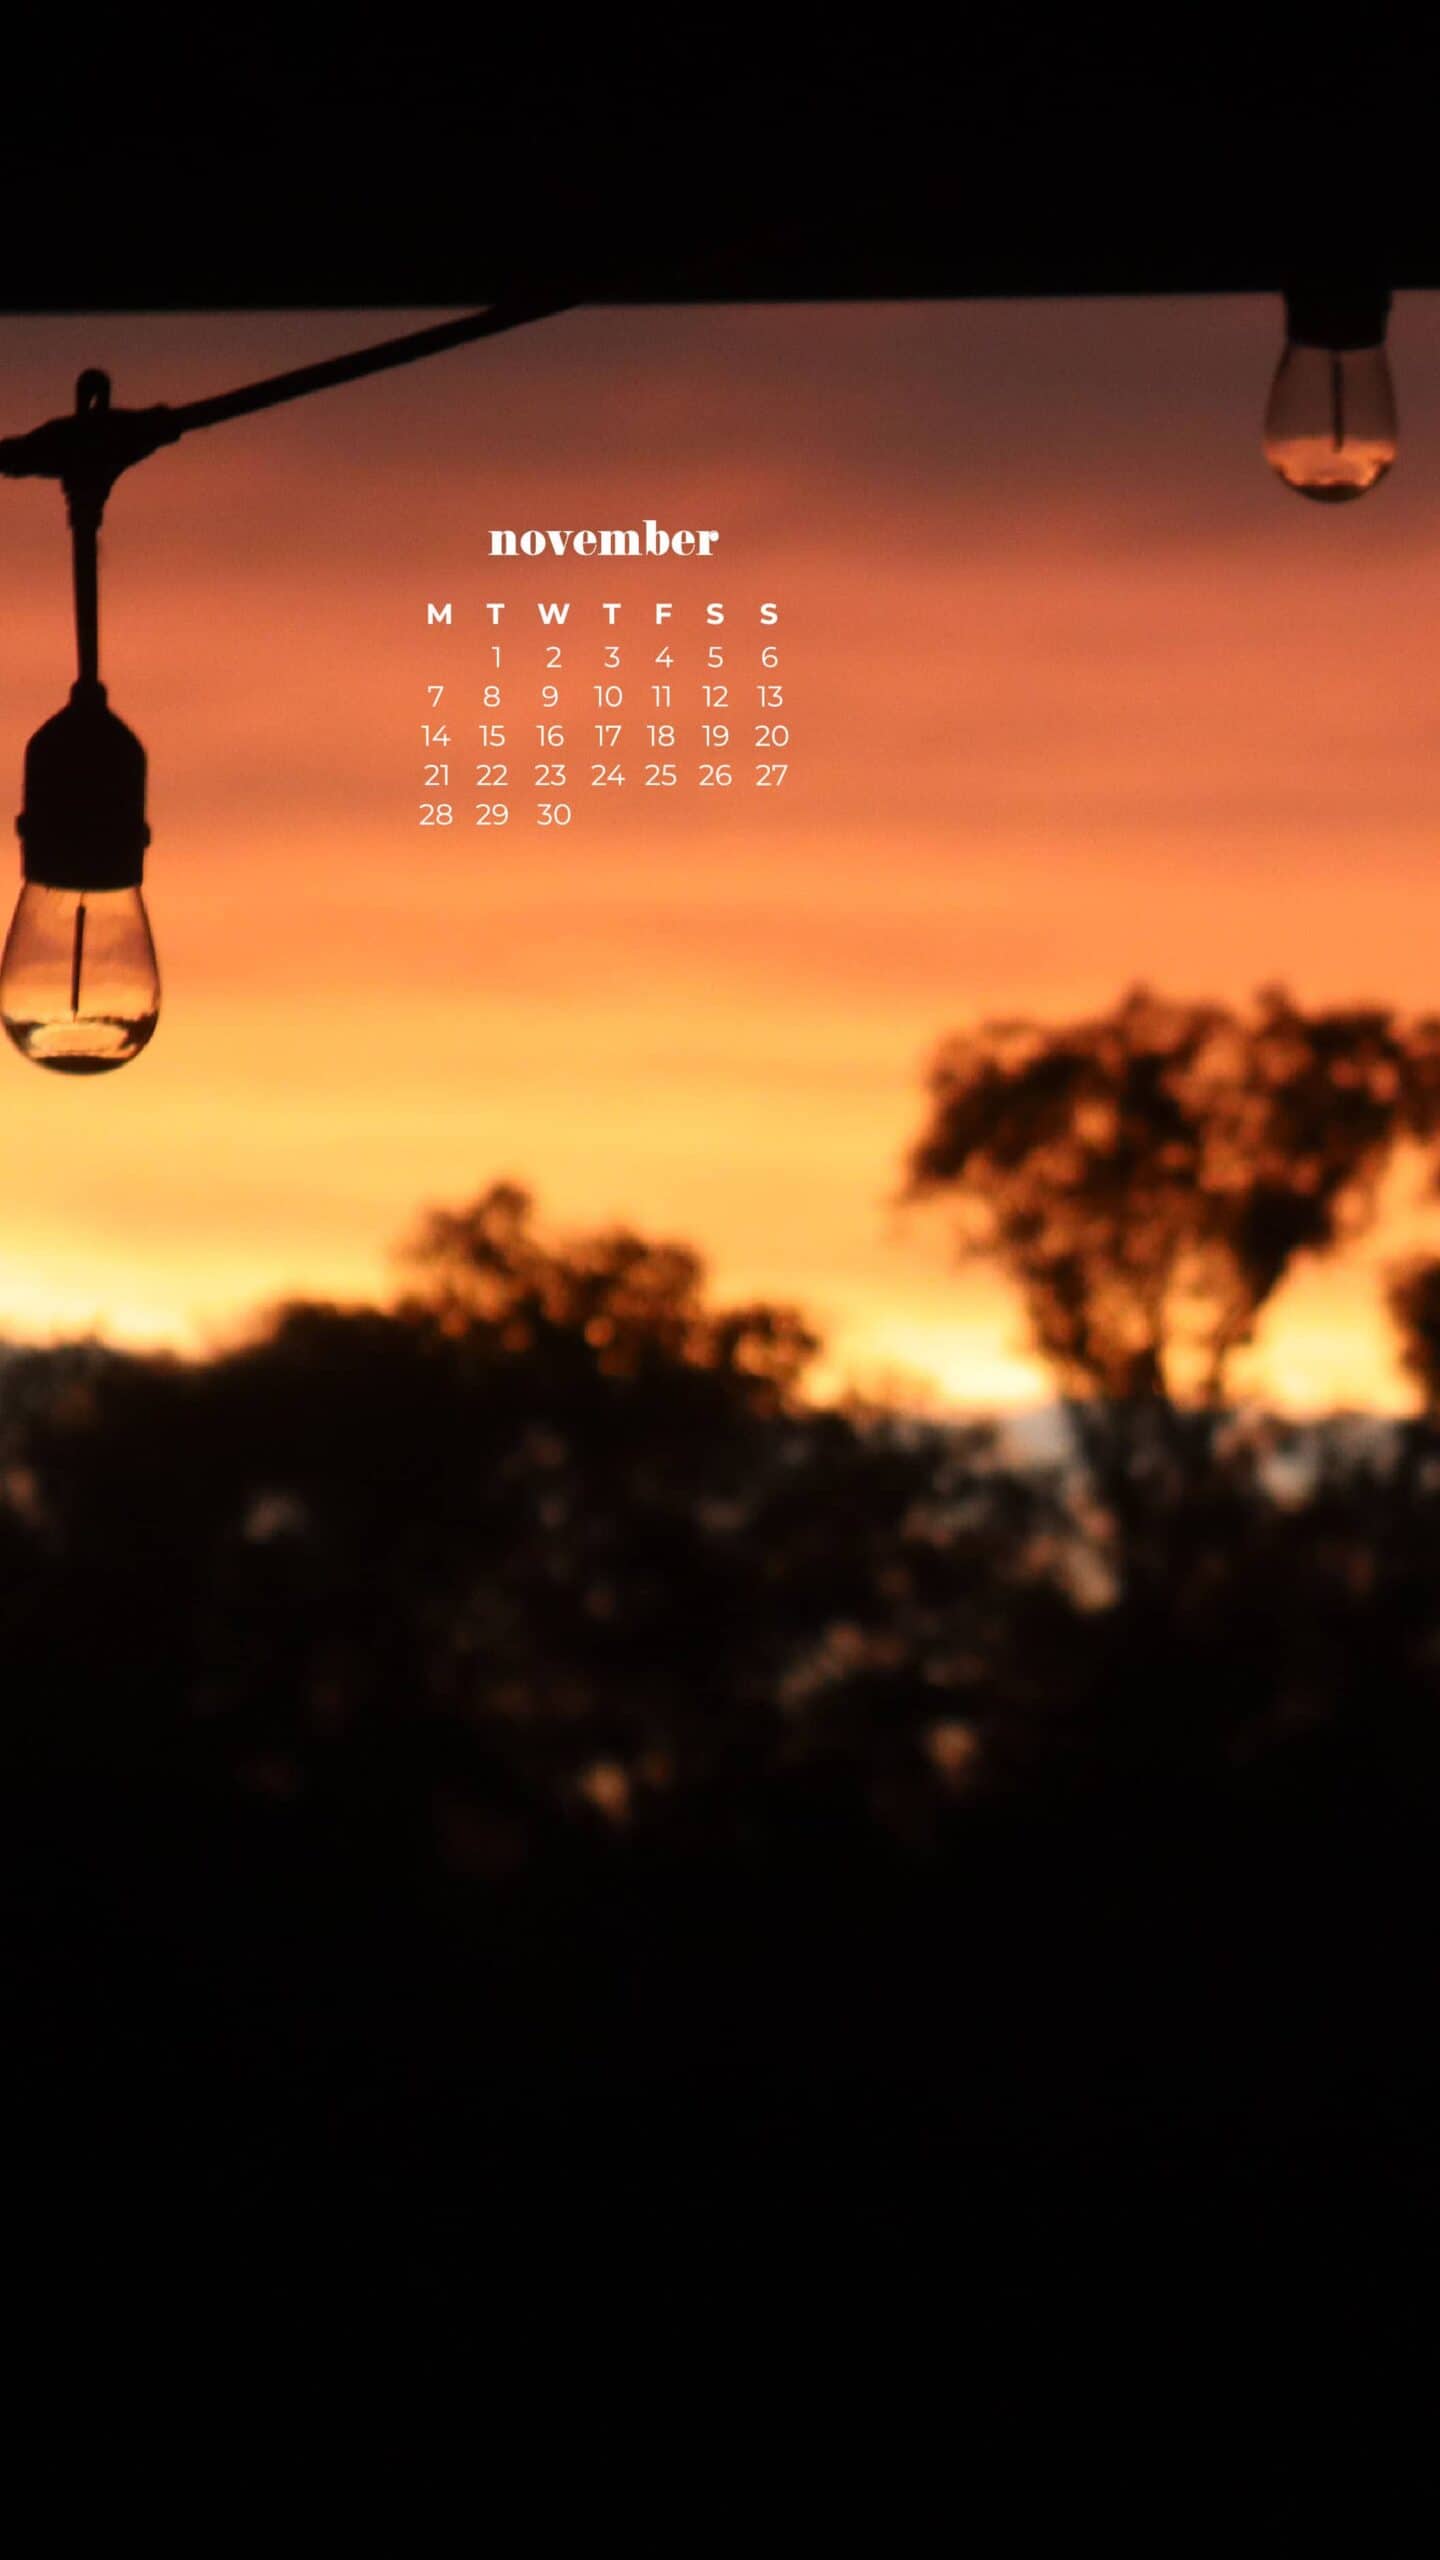 cafe outdoor lights on a deck at sunset November 2022 wallpapers – FREE calendars in Sunday & Monday starts + no-calendar designs. 59 beautiful options for desktop & smart phones!